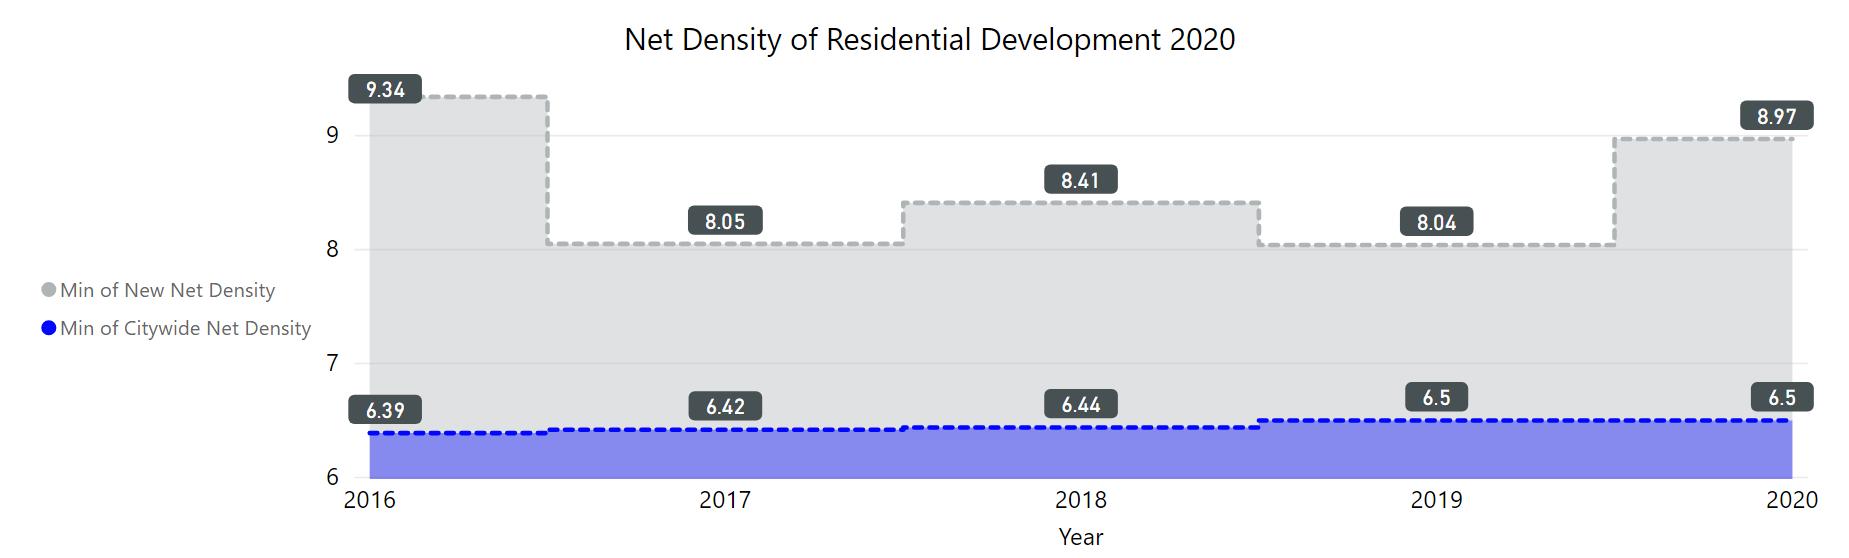 net density of residential development from 2016 to 2020. The min of new net density has gone up and down each year. the min of citywide next density has increased slightly between 2016 and 2020.